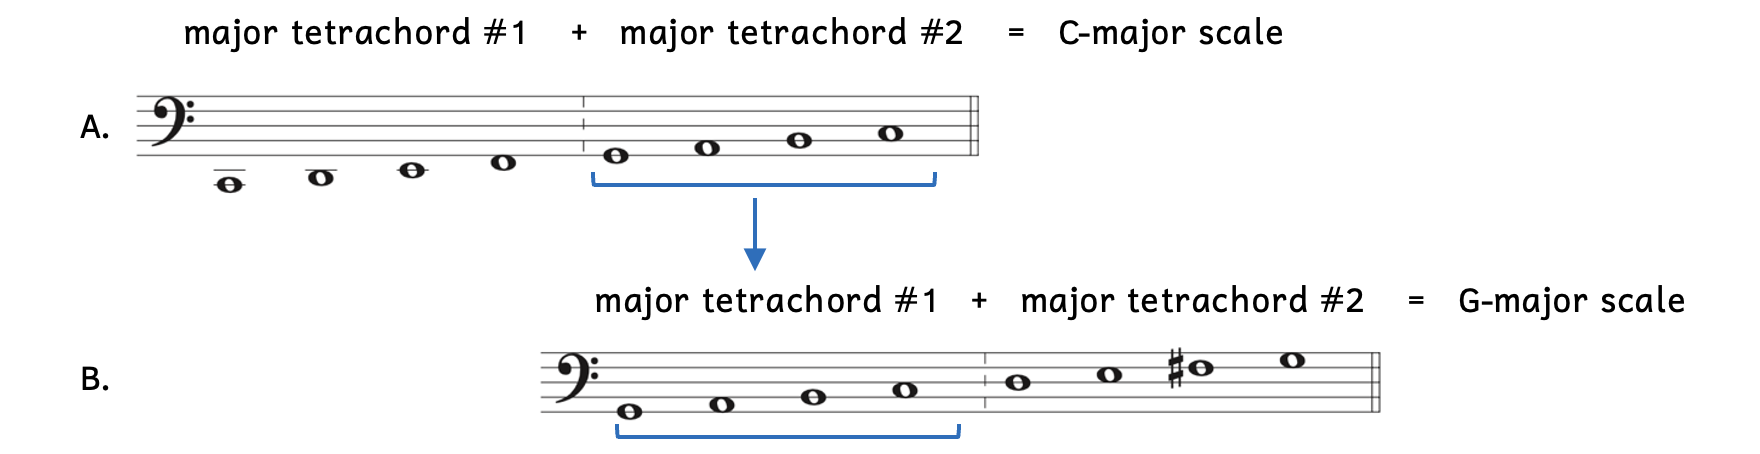 New major scales being built from the second tetrachord of a major scale. Example A shows major tetrachord #1 consisting of C-D-E-F and major tetrachord #2 consisting of G-A-B-C. Together, they create the C-major scale. Example B takes major tetrachord #2 from Example A and makes it major tetrachord #1. From there, a new major tetrachord #2 is added with pitches D, E, F-sharp, G. Together these two major tetrachords create the G-major scale.